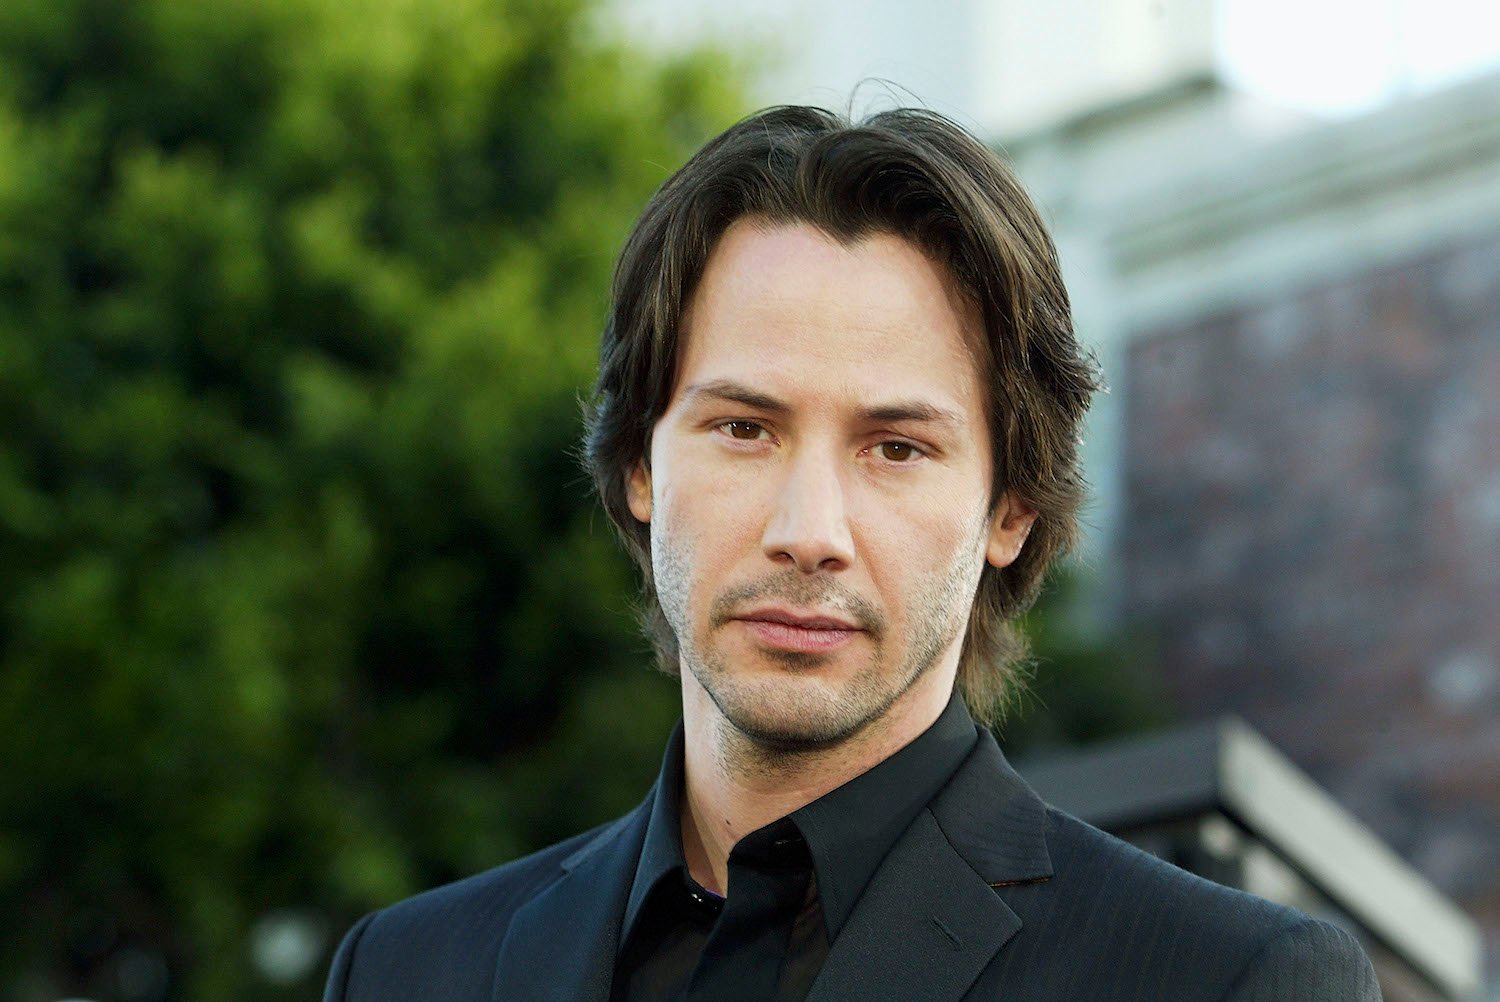 Keanu Reeves arrives at the premiere of The Matrix Reloaded at the Village Theater on May 7, 2003